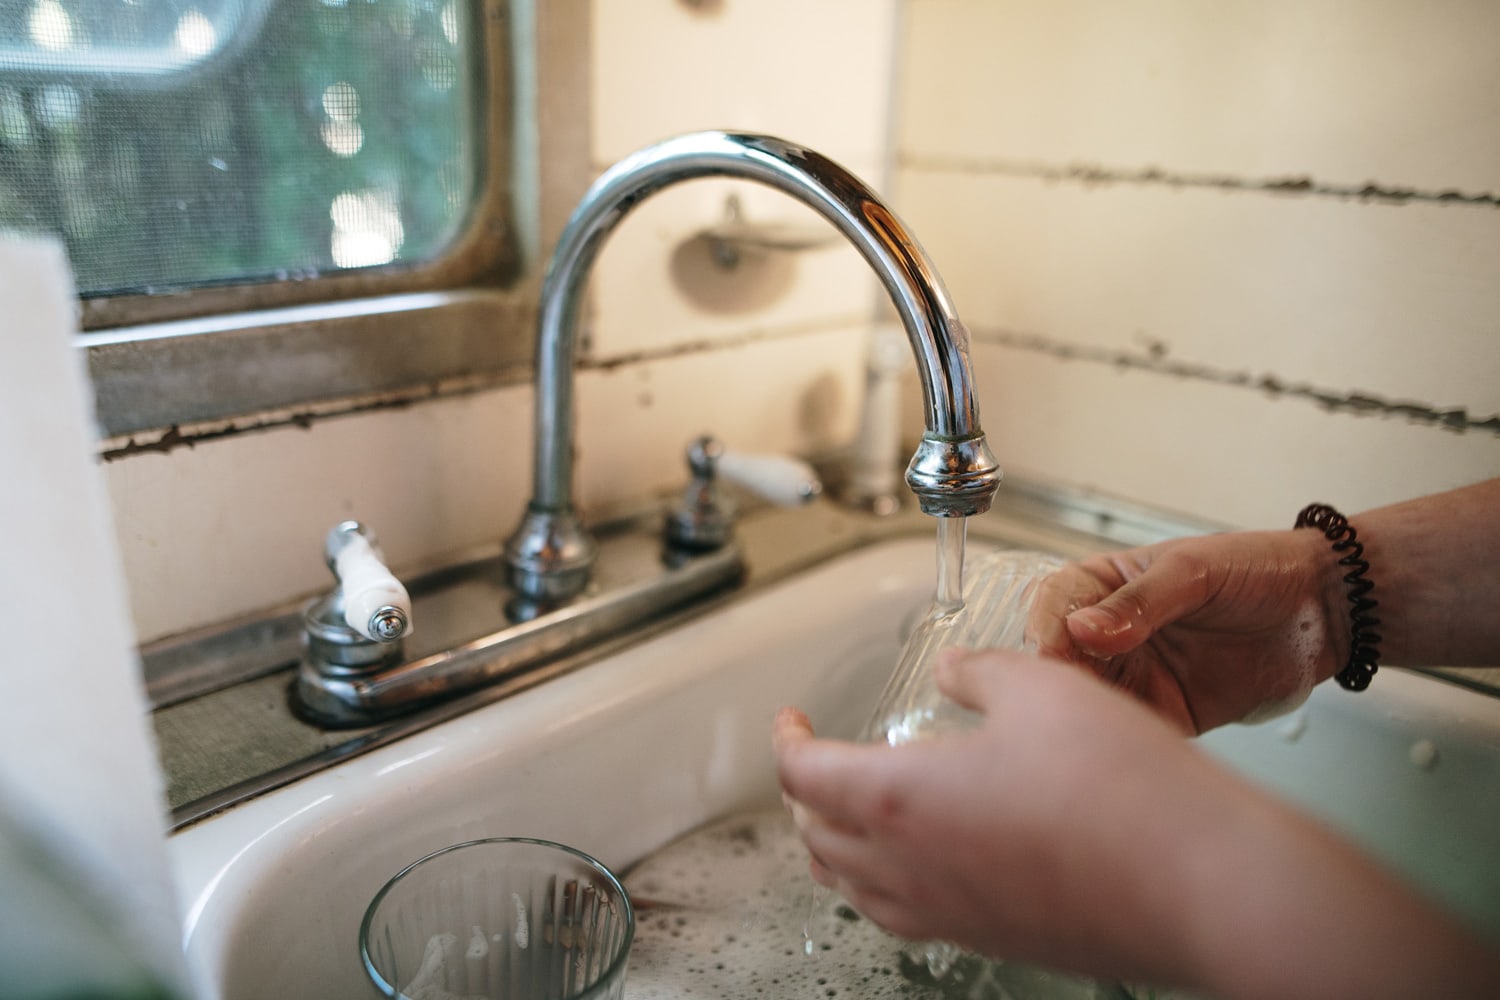 Detail of a person washing dishes inside a motor home